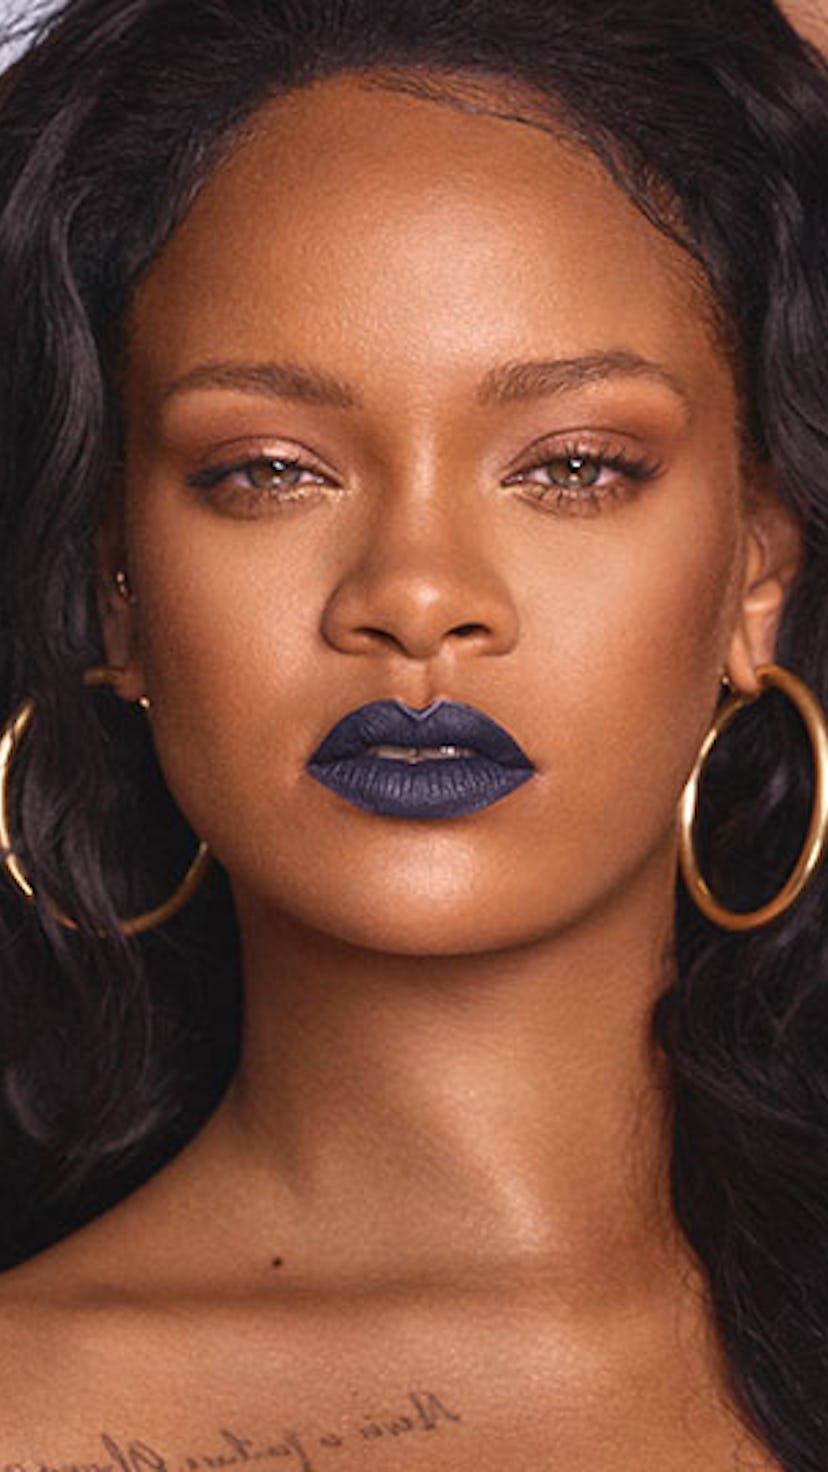 Rihanna with dark blue lipstick and gold hoop earrings for a Fenty Beauty campaign.